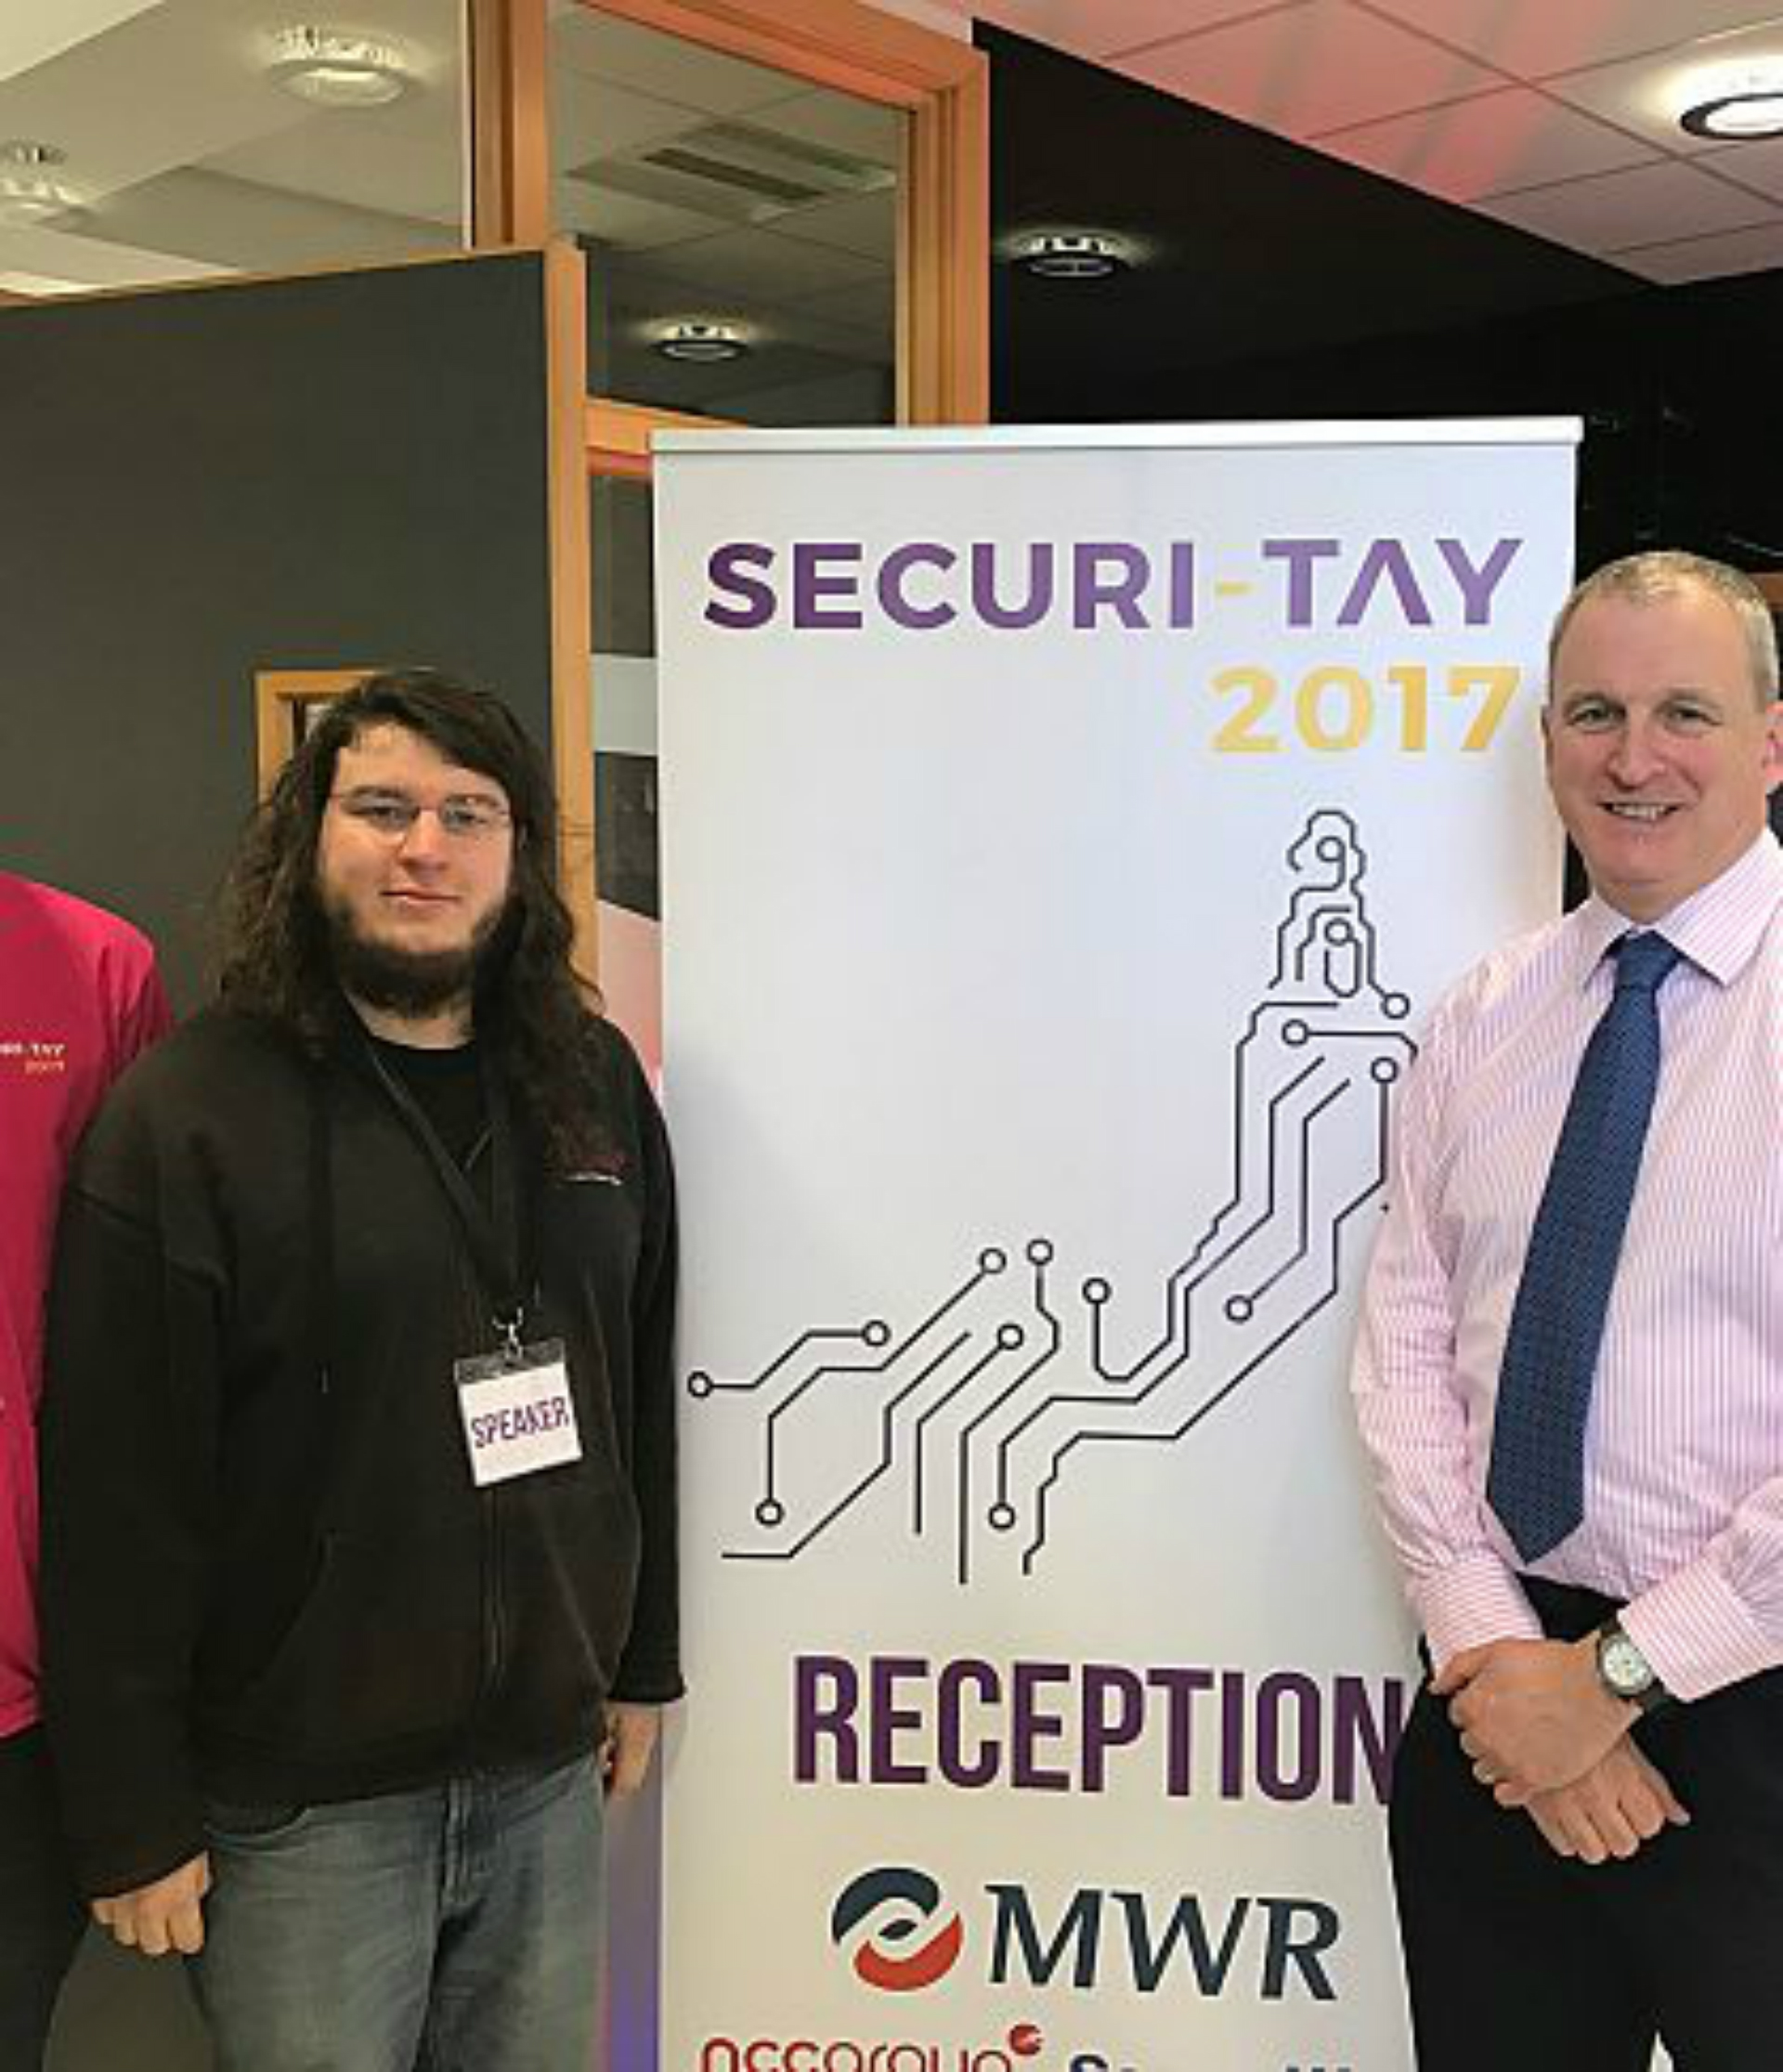 Ethical Hackers host Securi-Tay 2017